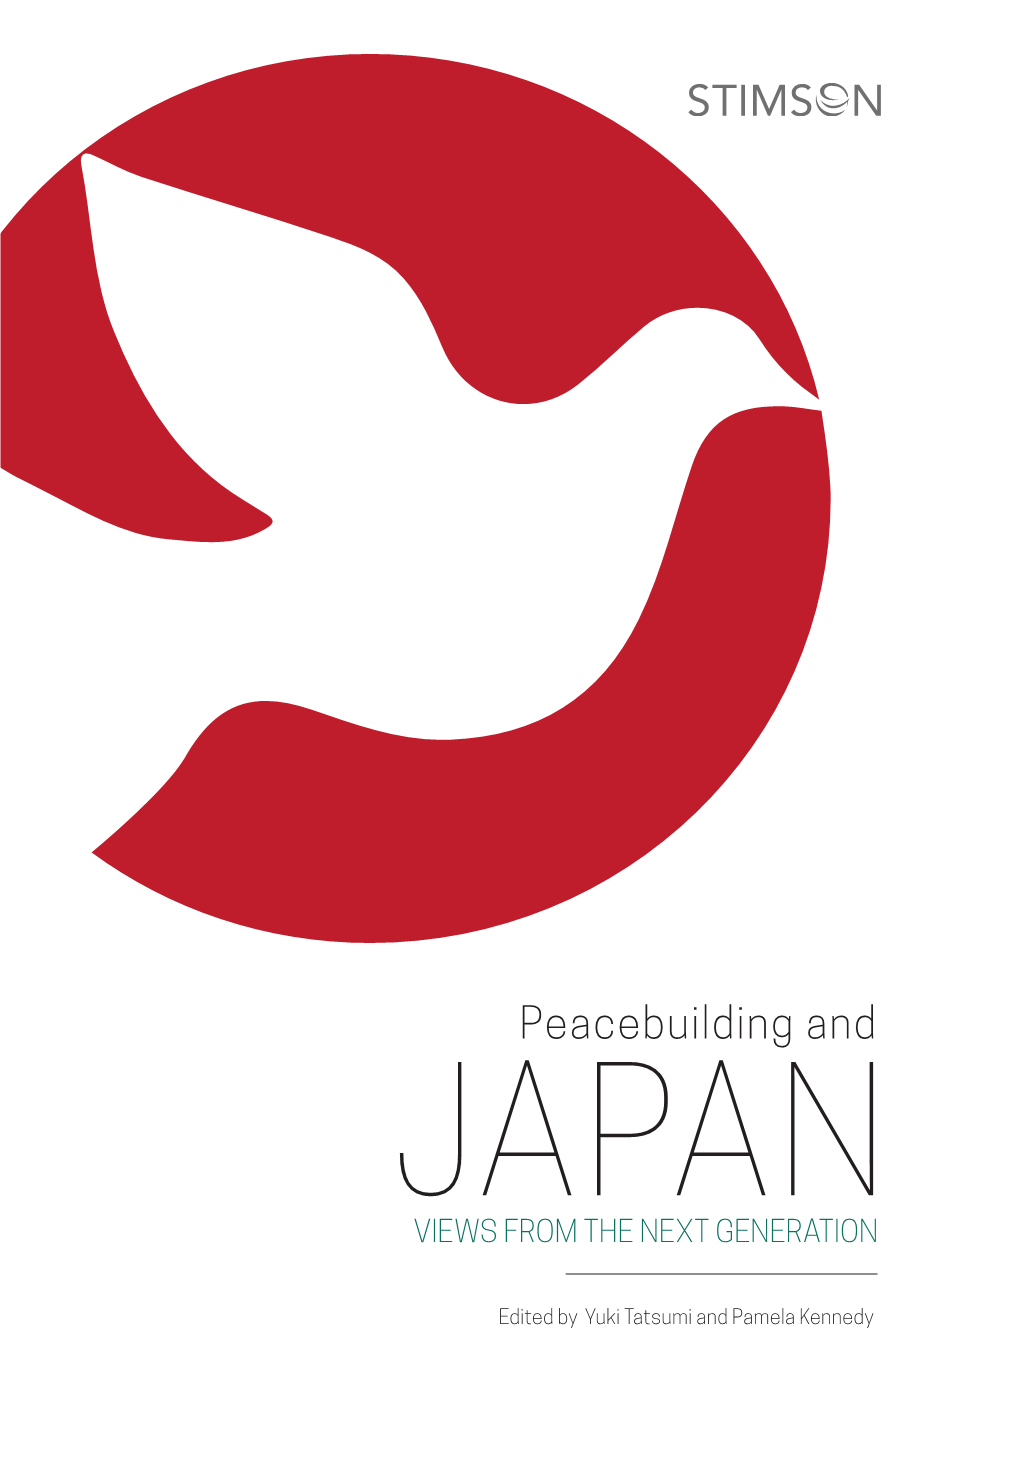 Peacebuilding and JAPAN VIEWS from the NEXT GENERATION